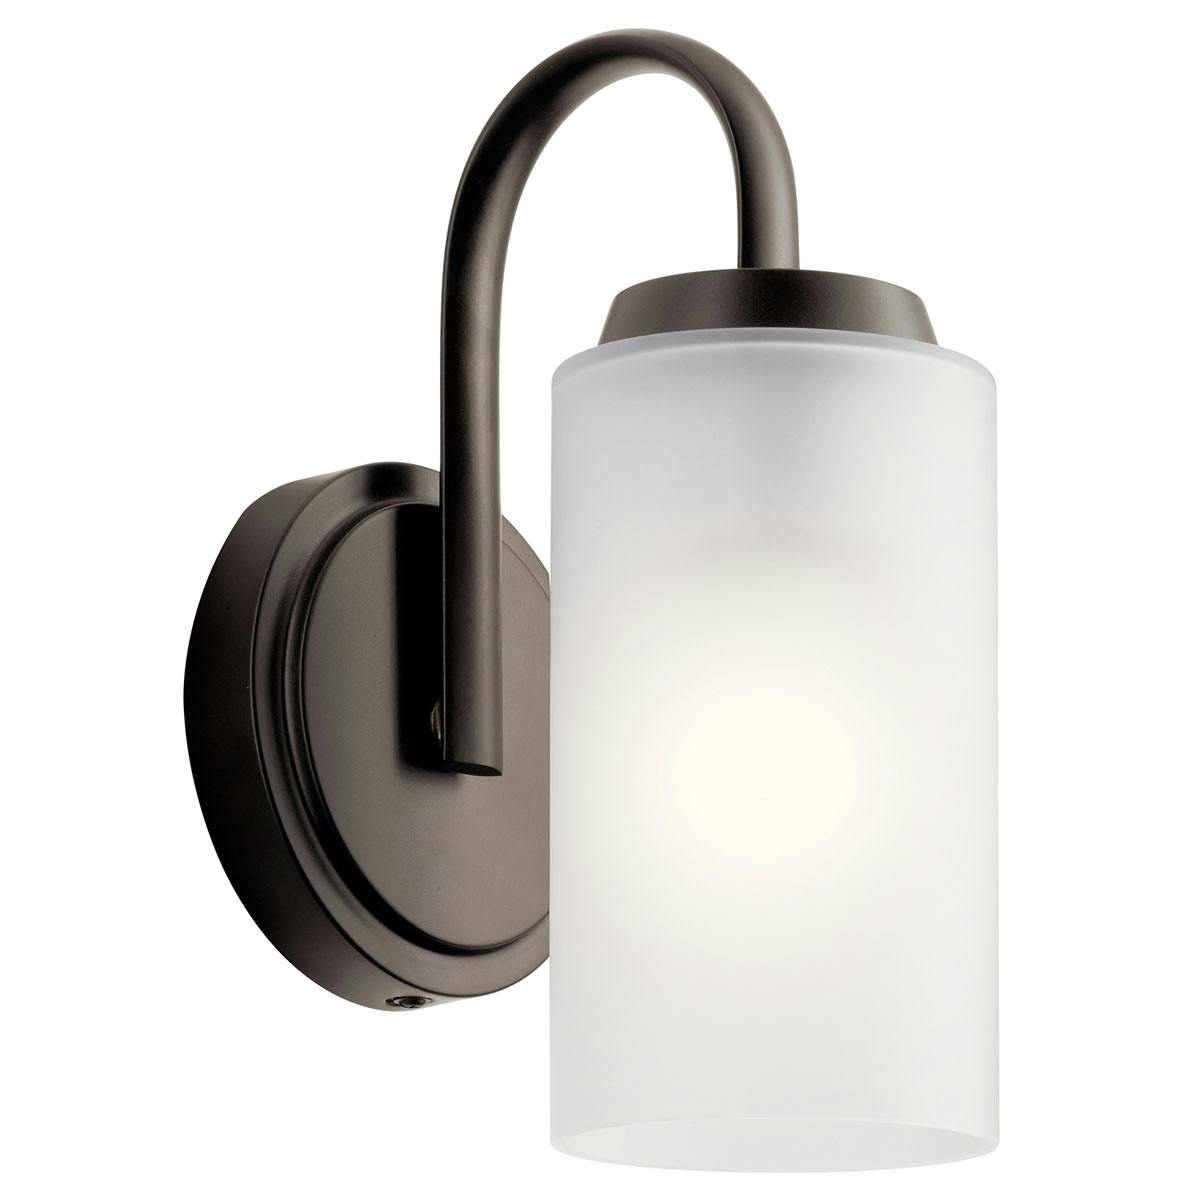 Kennewick 1 Light Sconce Olde Bronze on a white background